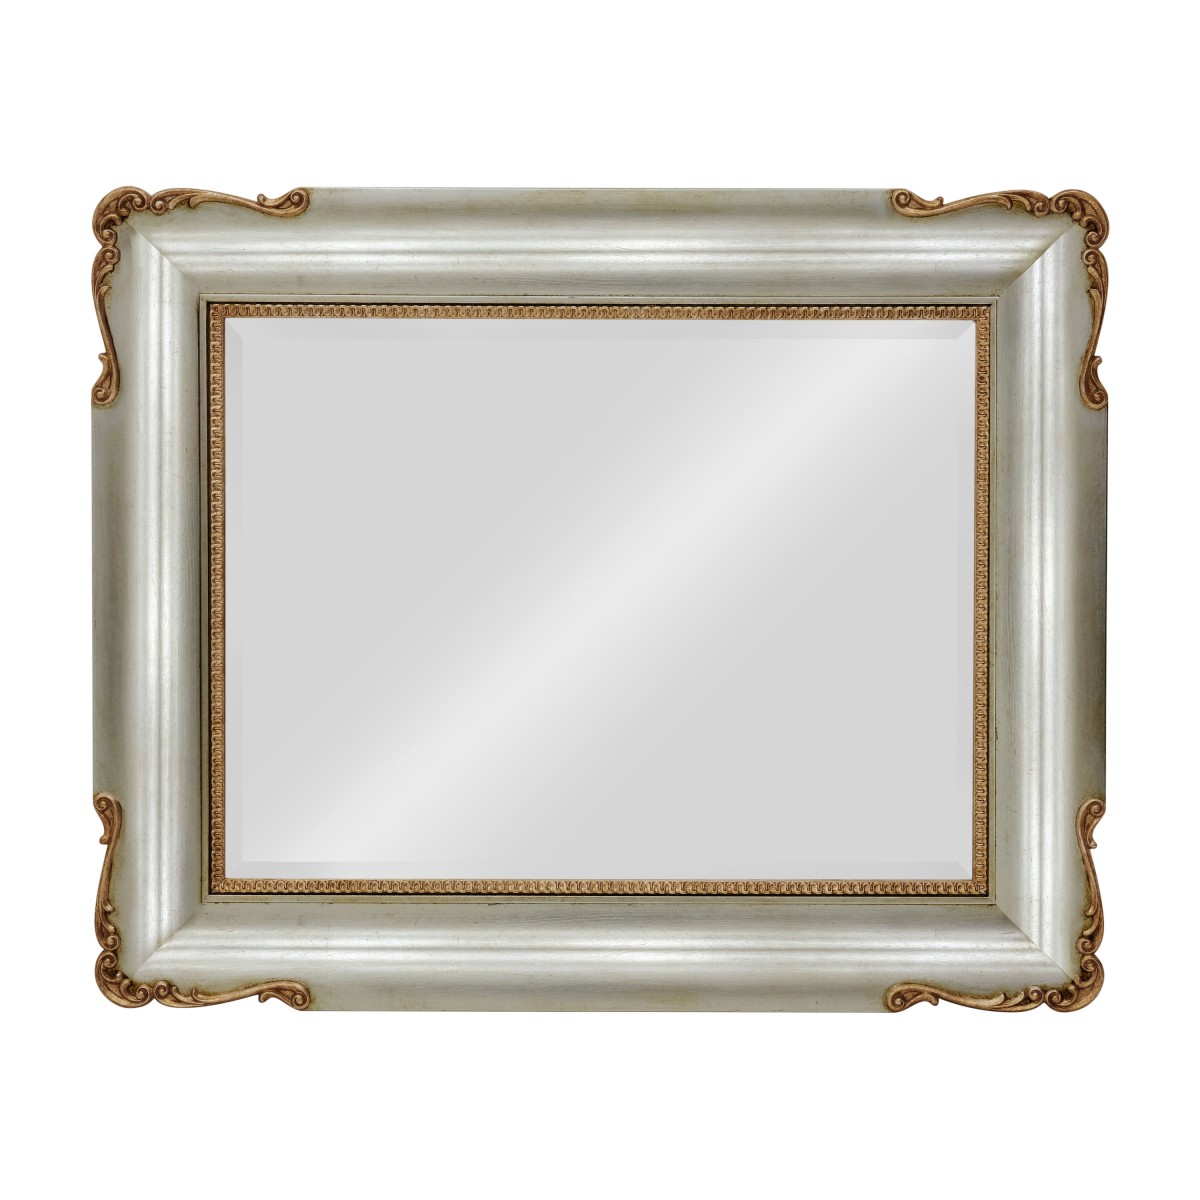 classic style wooden mirror